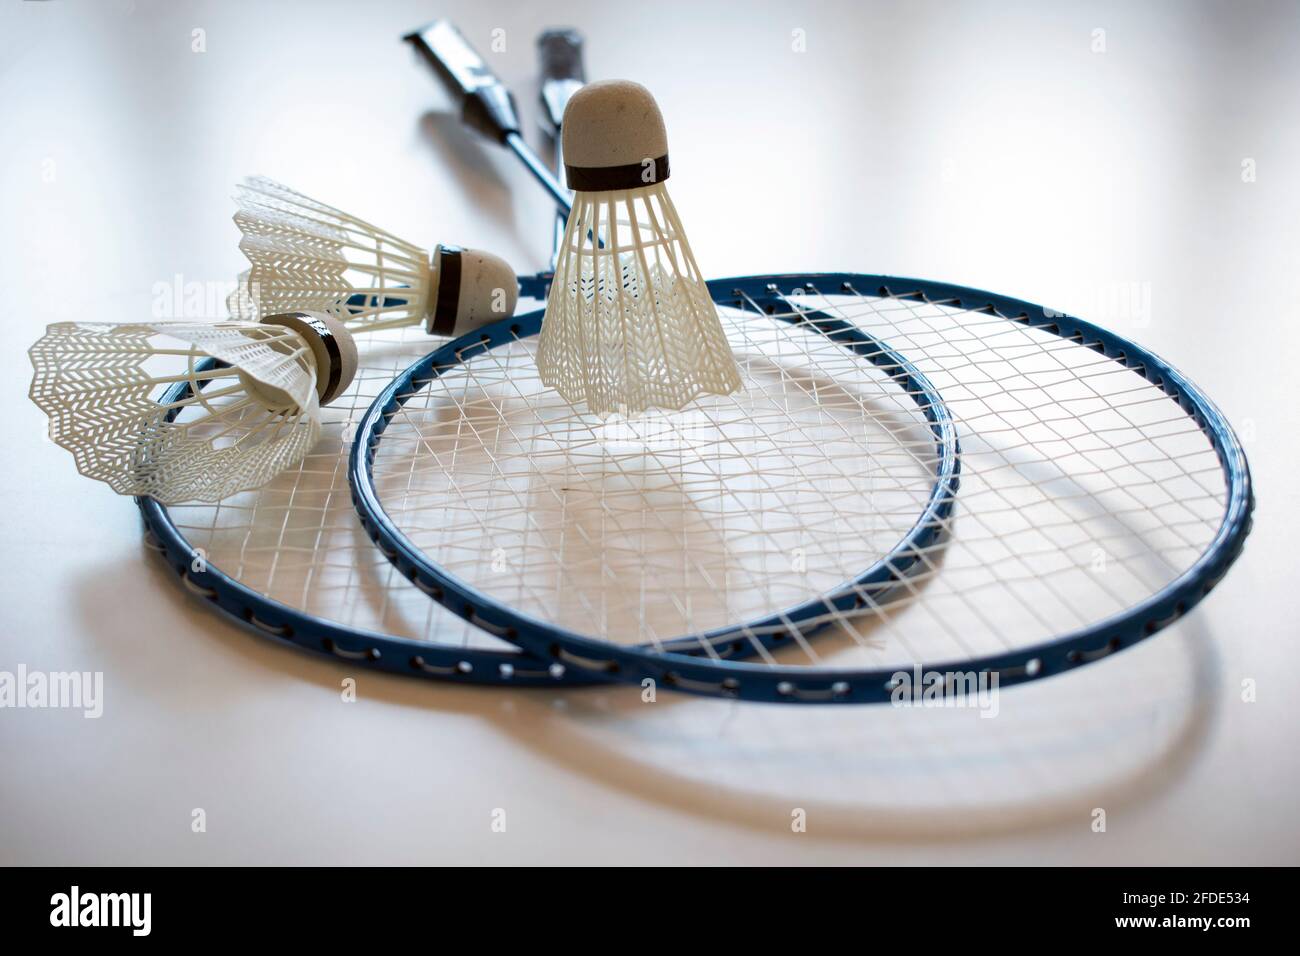 Badminton set - two racquets and shuttlecocks Stock Photo